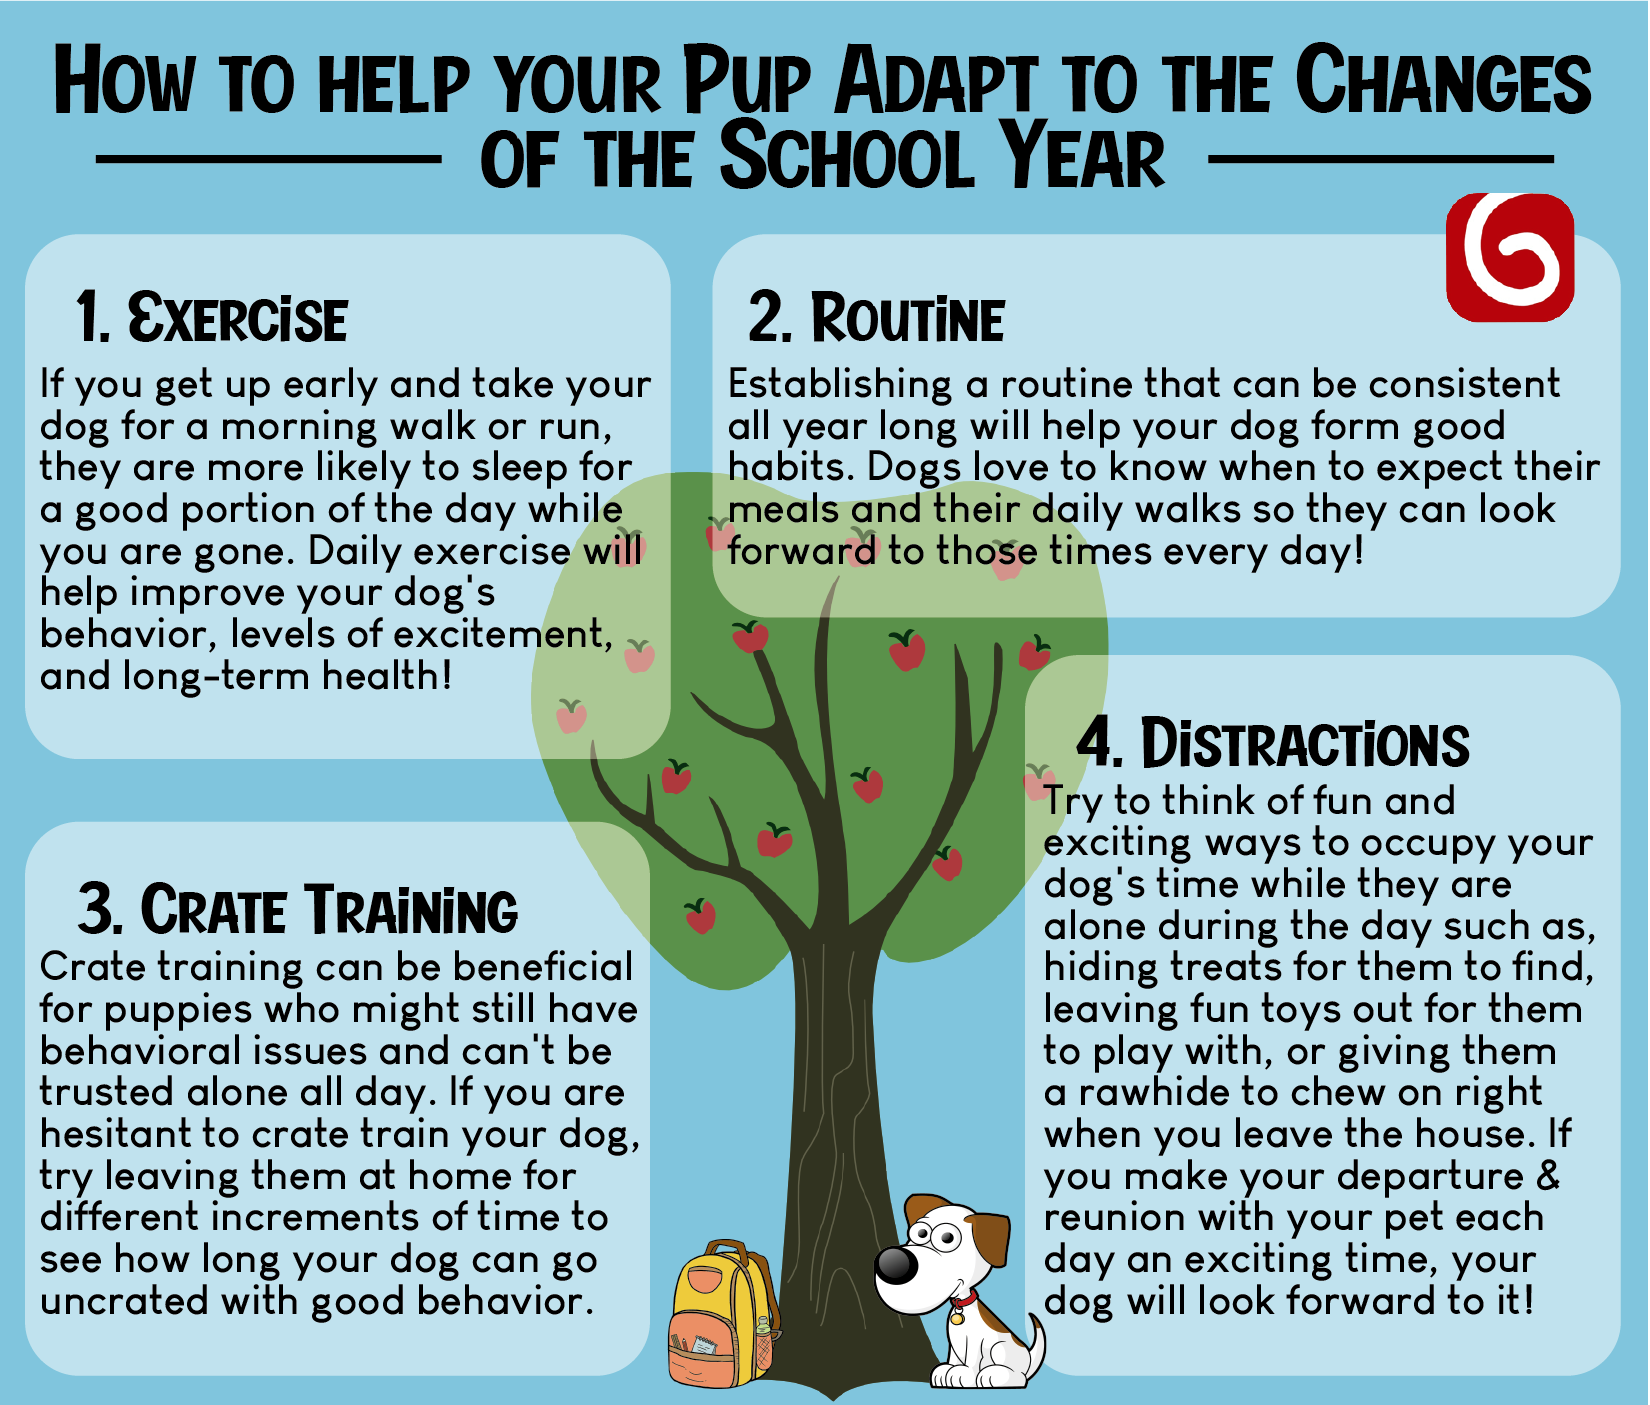 4 tips on how to help your pup adapt to the changes of the school year.